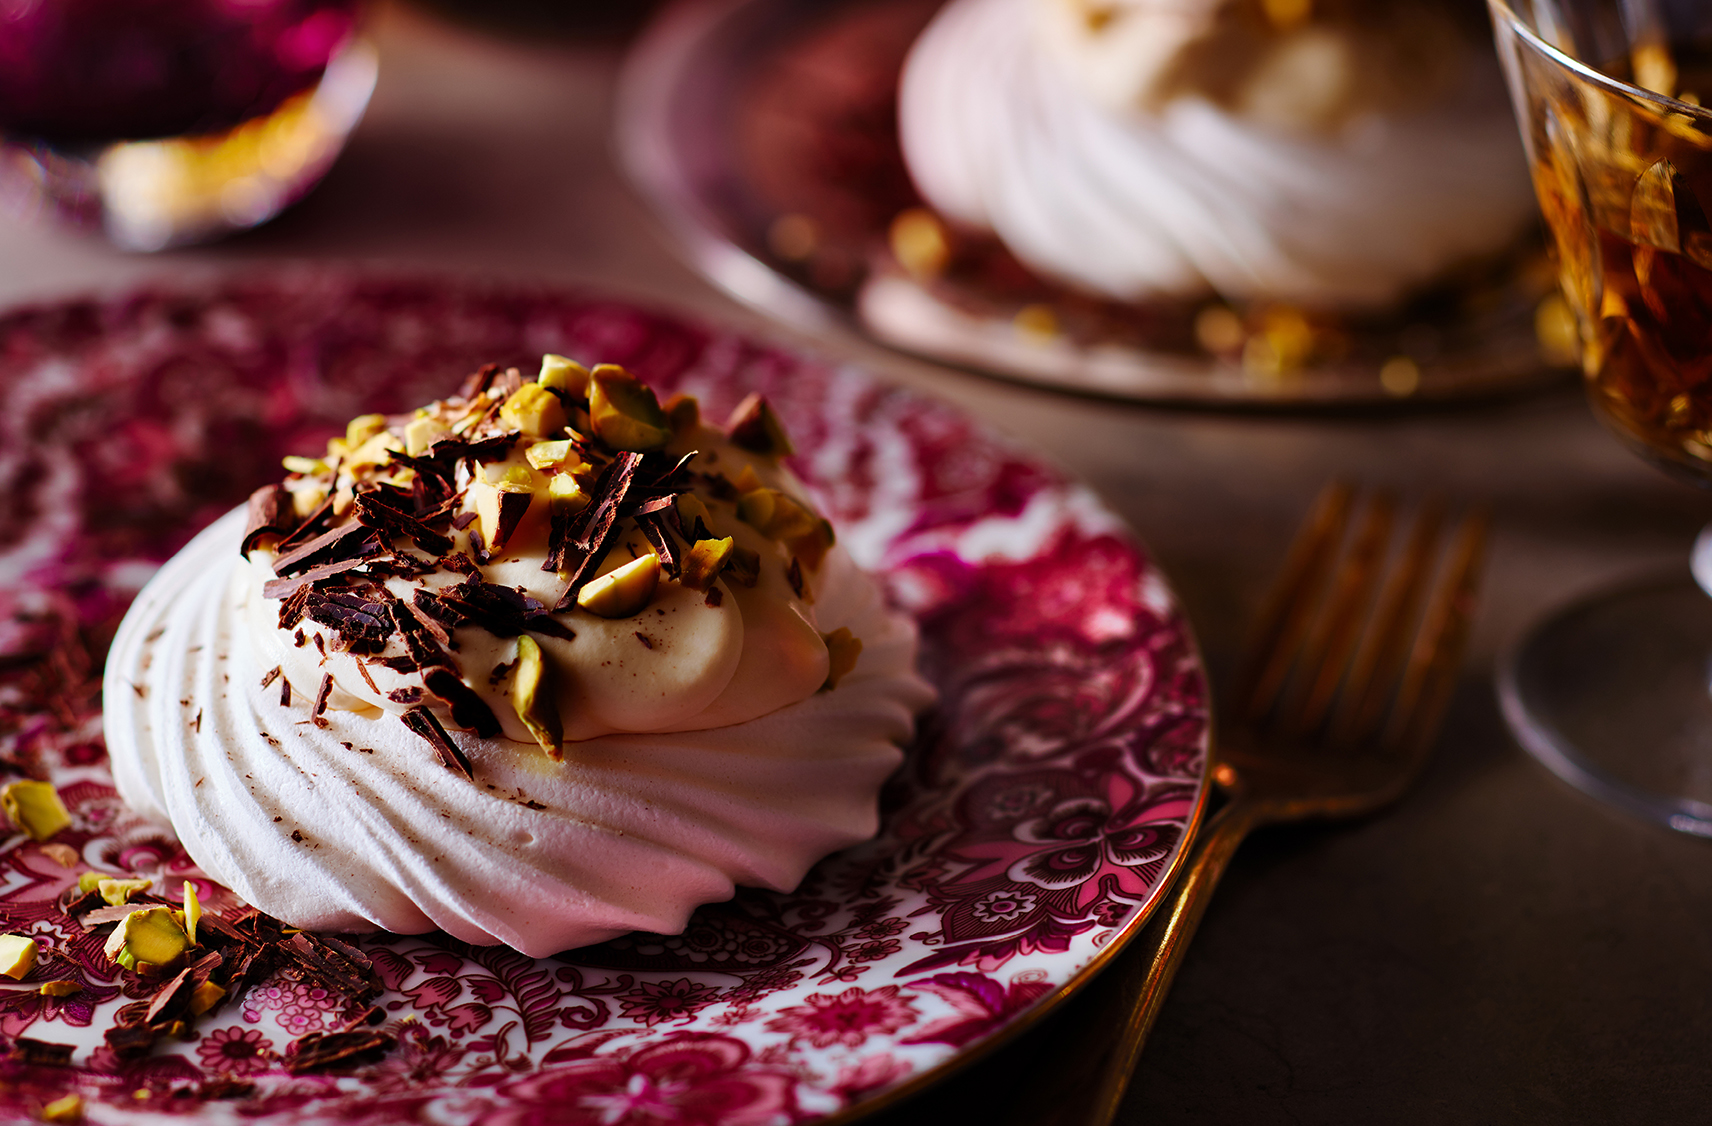 Meringue nests topped with devon cream, chocolate and chopped pistachio